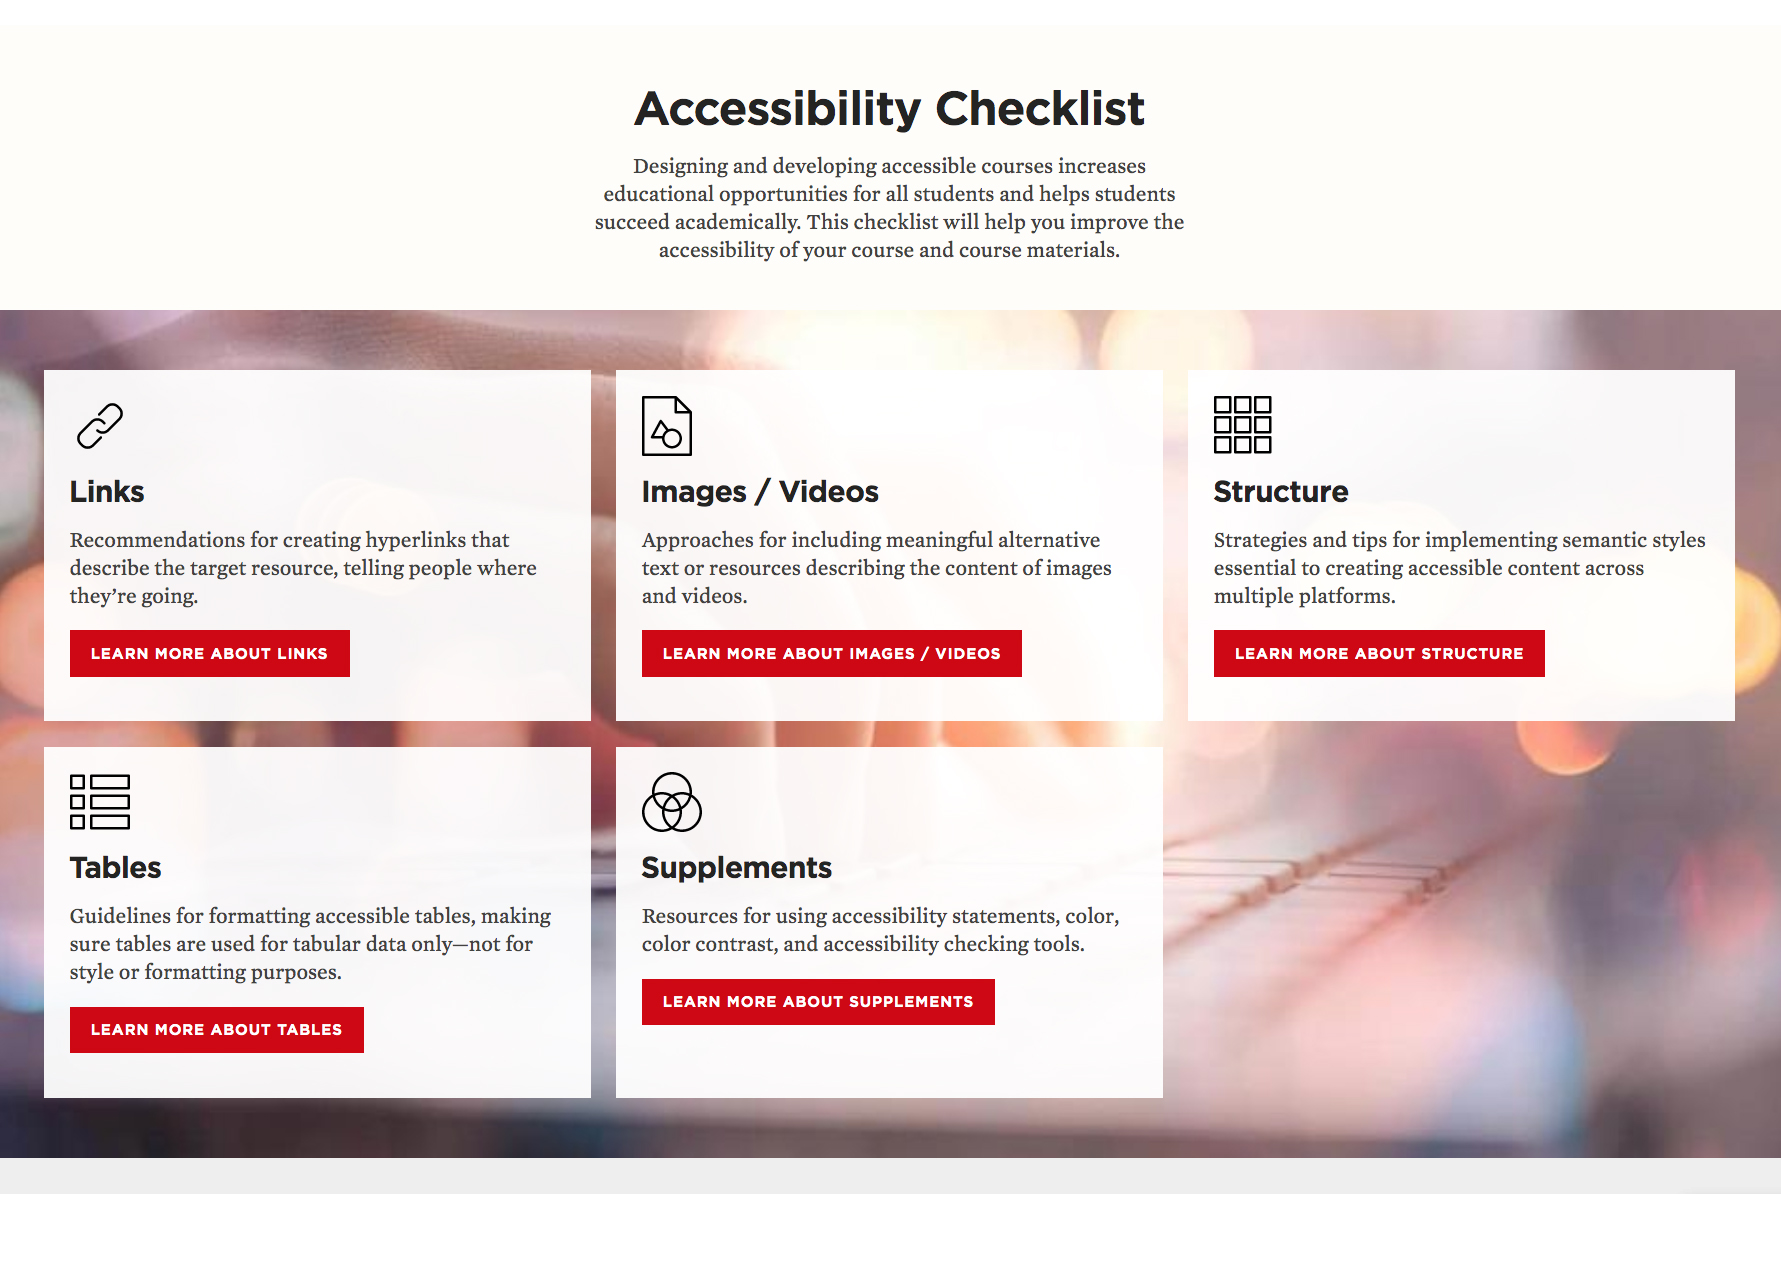 The Accessibility Checklist is available on the Center for Transformative Teaching website.